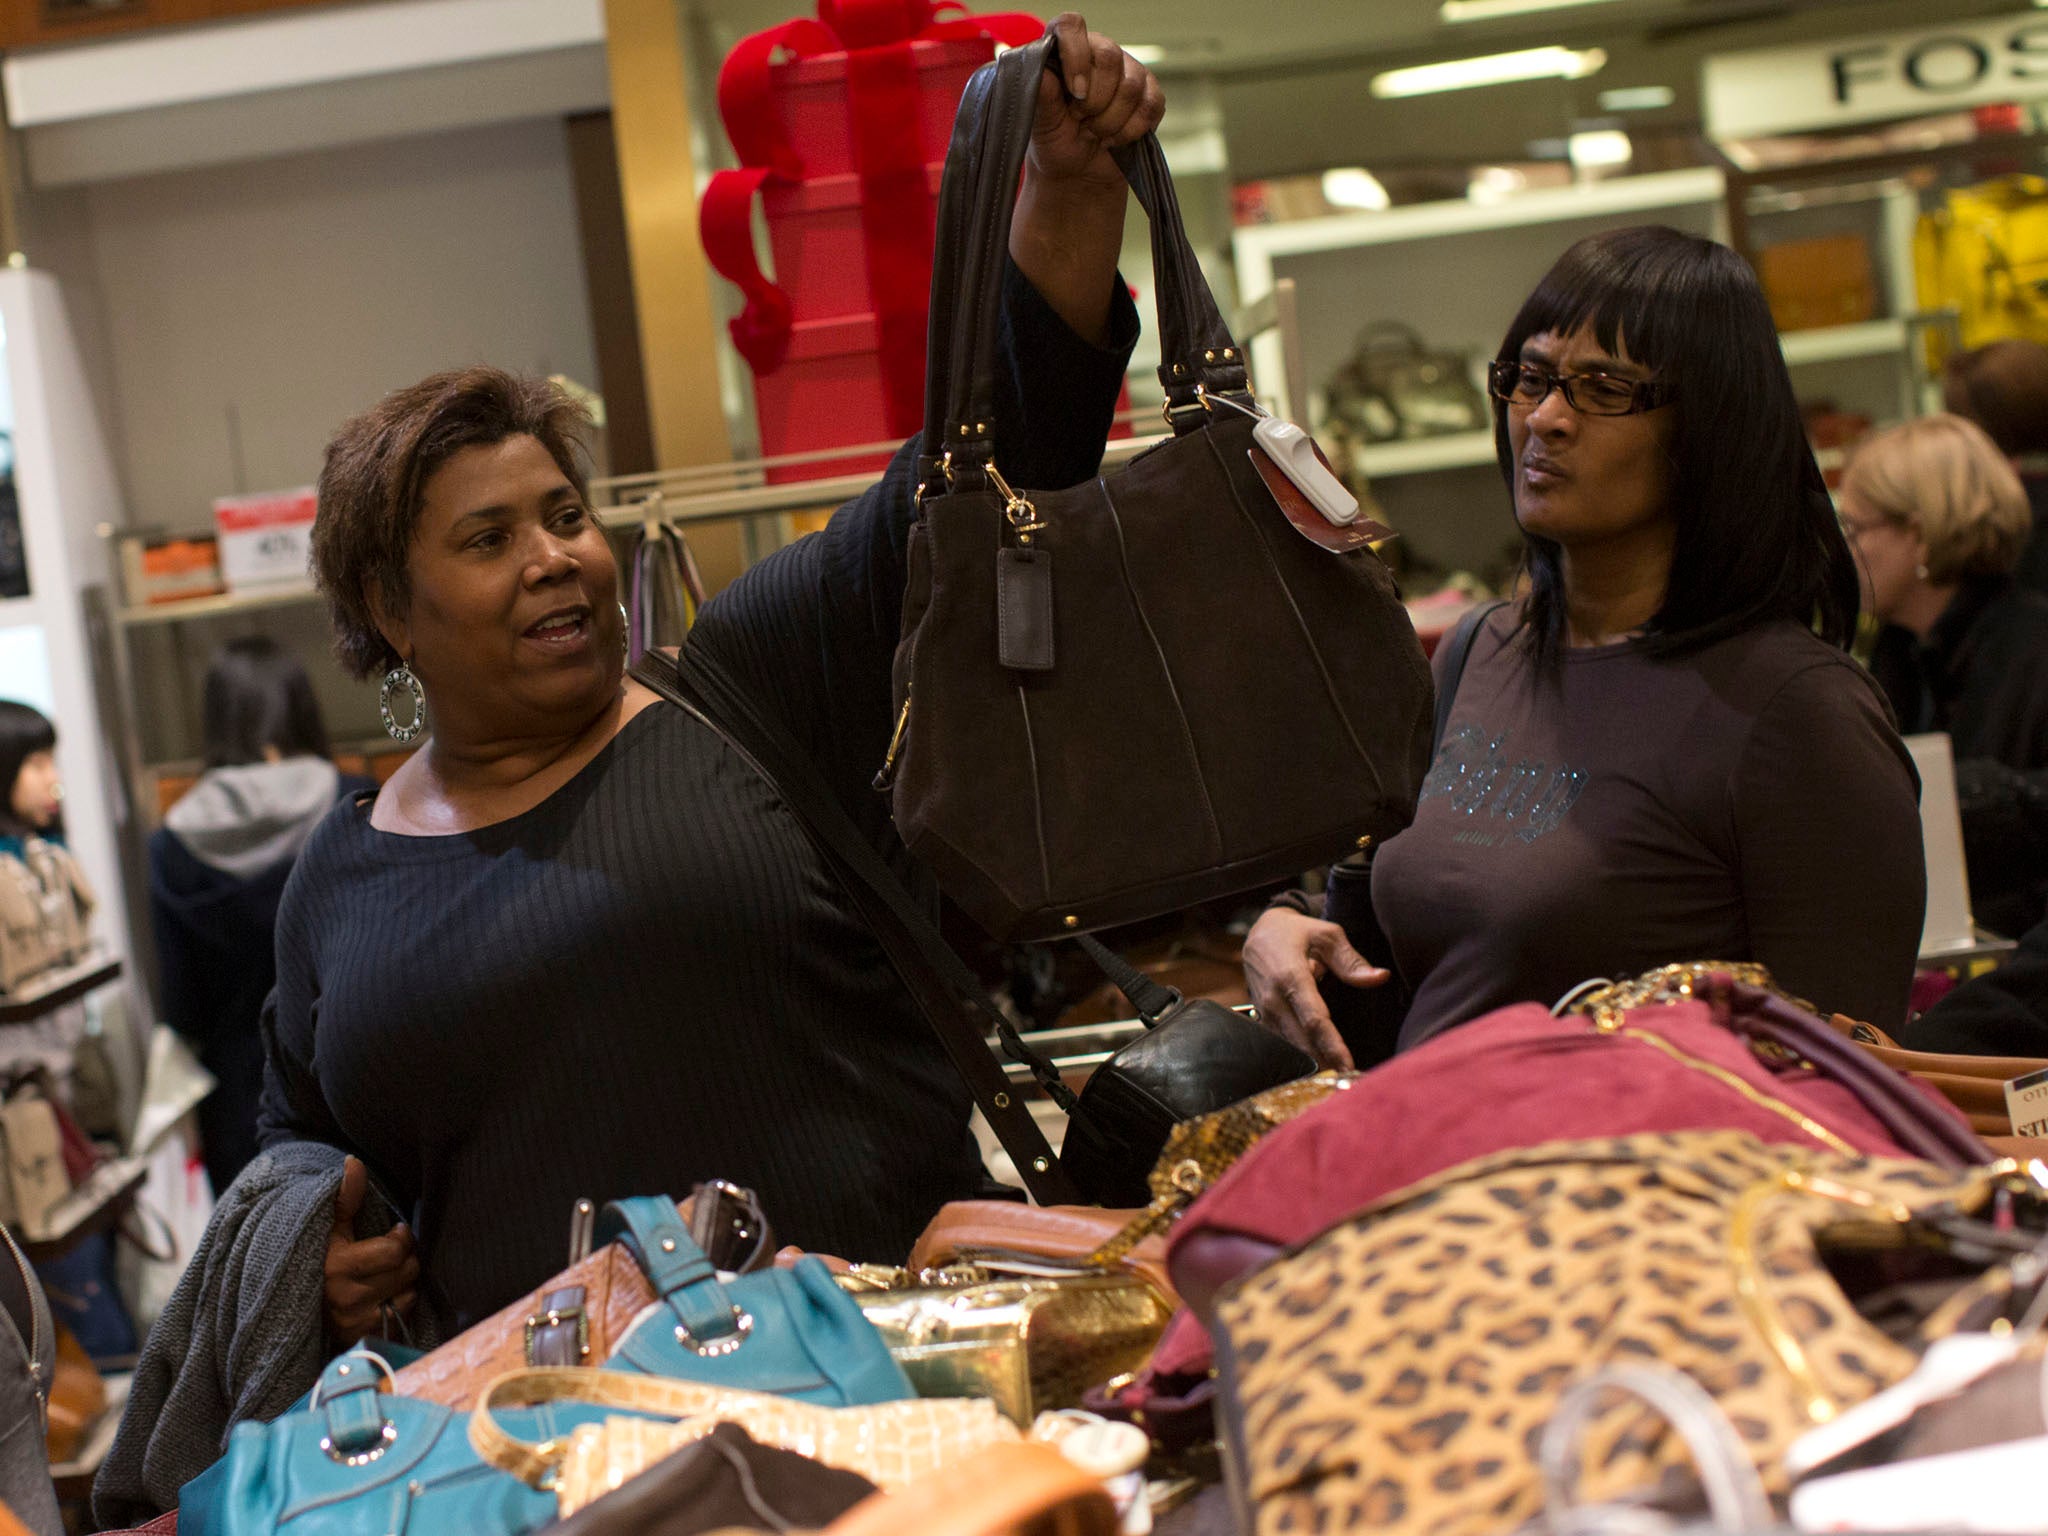 Shoppers in Macy's store over Thanksgiving Weekend